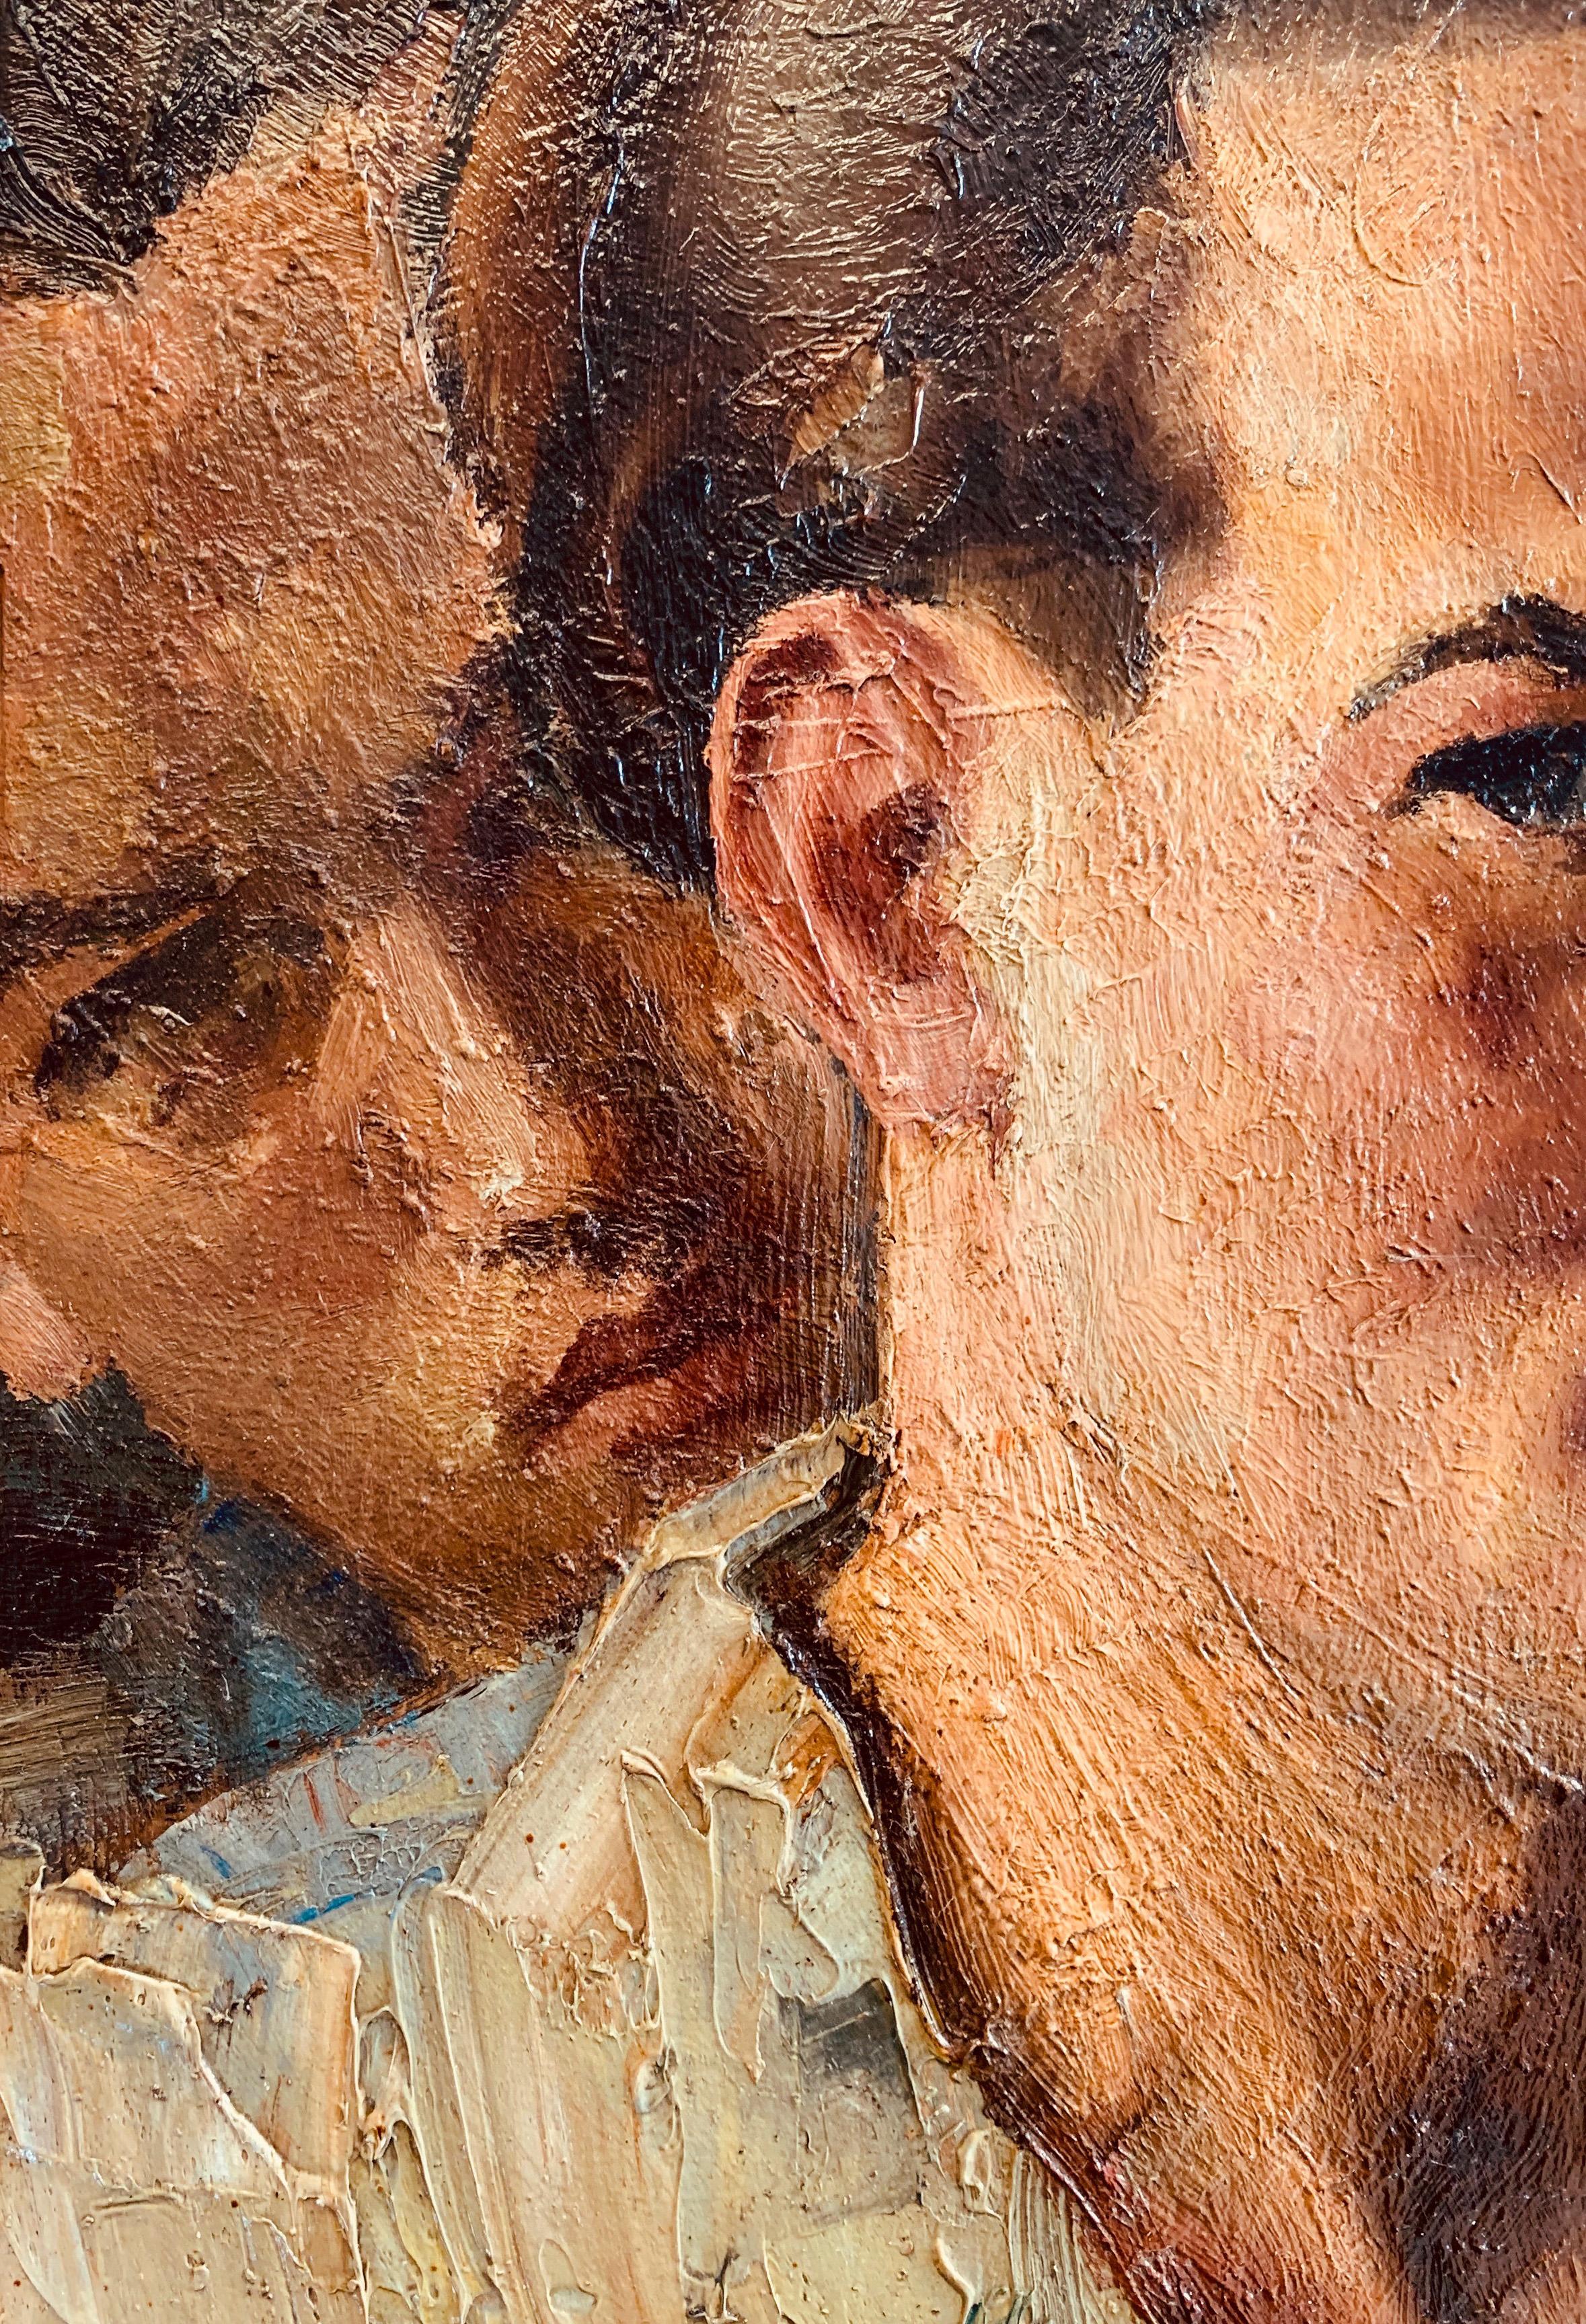 Dated 1936, this striking self-portrait of a young man, seen from three vantage points, is painted with warm colors and a bold impasto technique that makes the faces come alive. The man is wearing an artist smock, and his expressive mouth and wavy